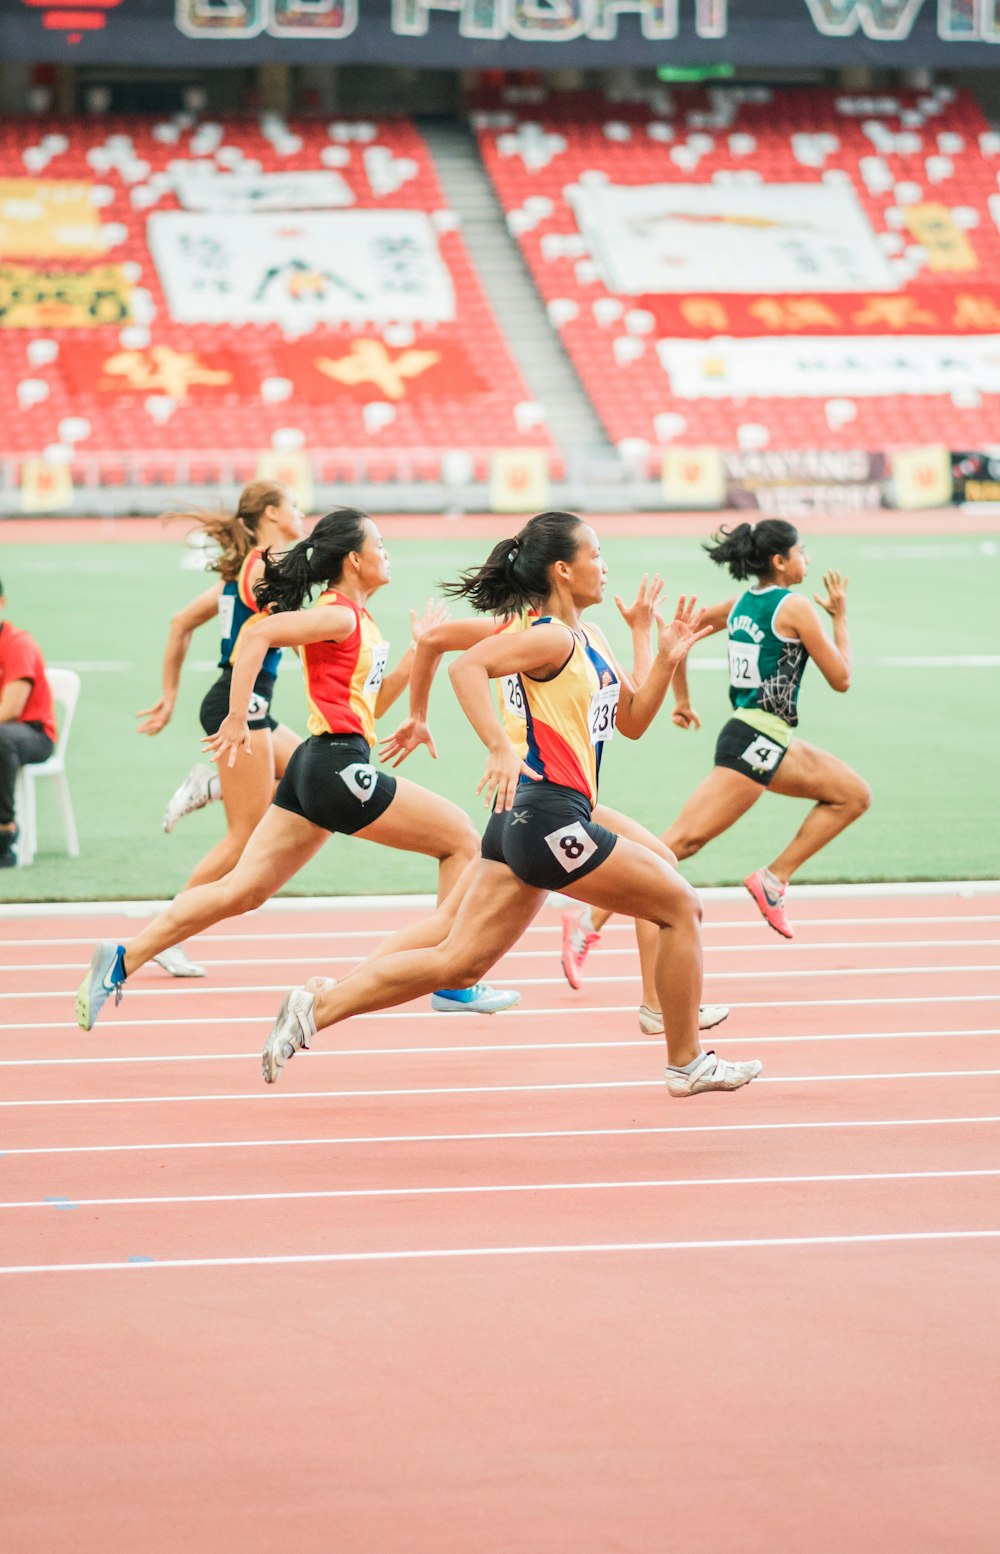 500+ Track And Field Pictures | Download Free Images on Unsplash